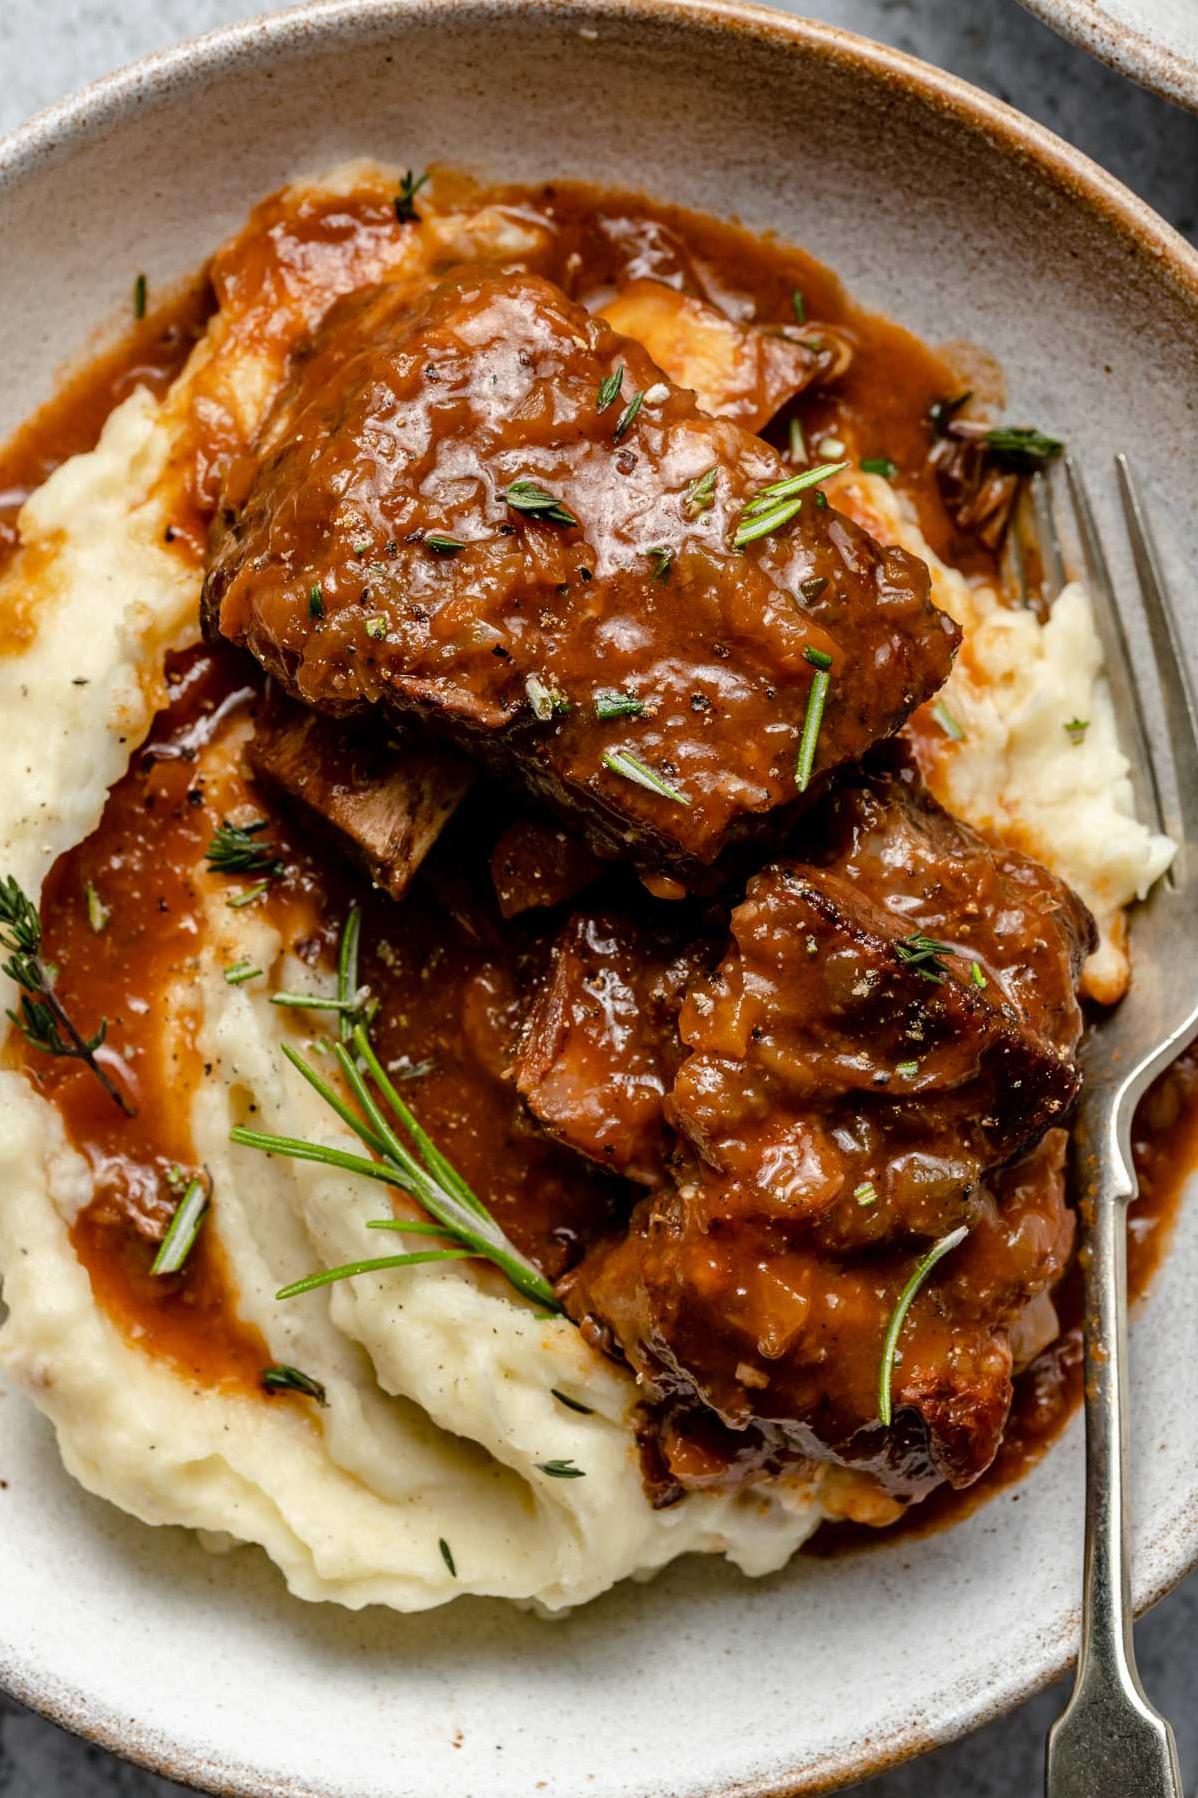  Melt-in-your-mouth short ribs braised to perfection